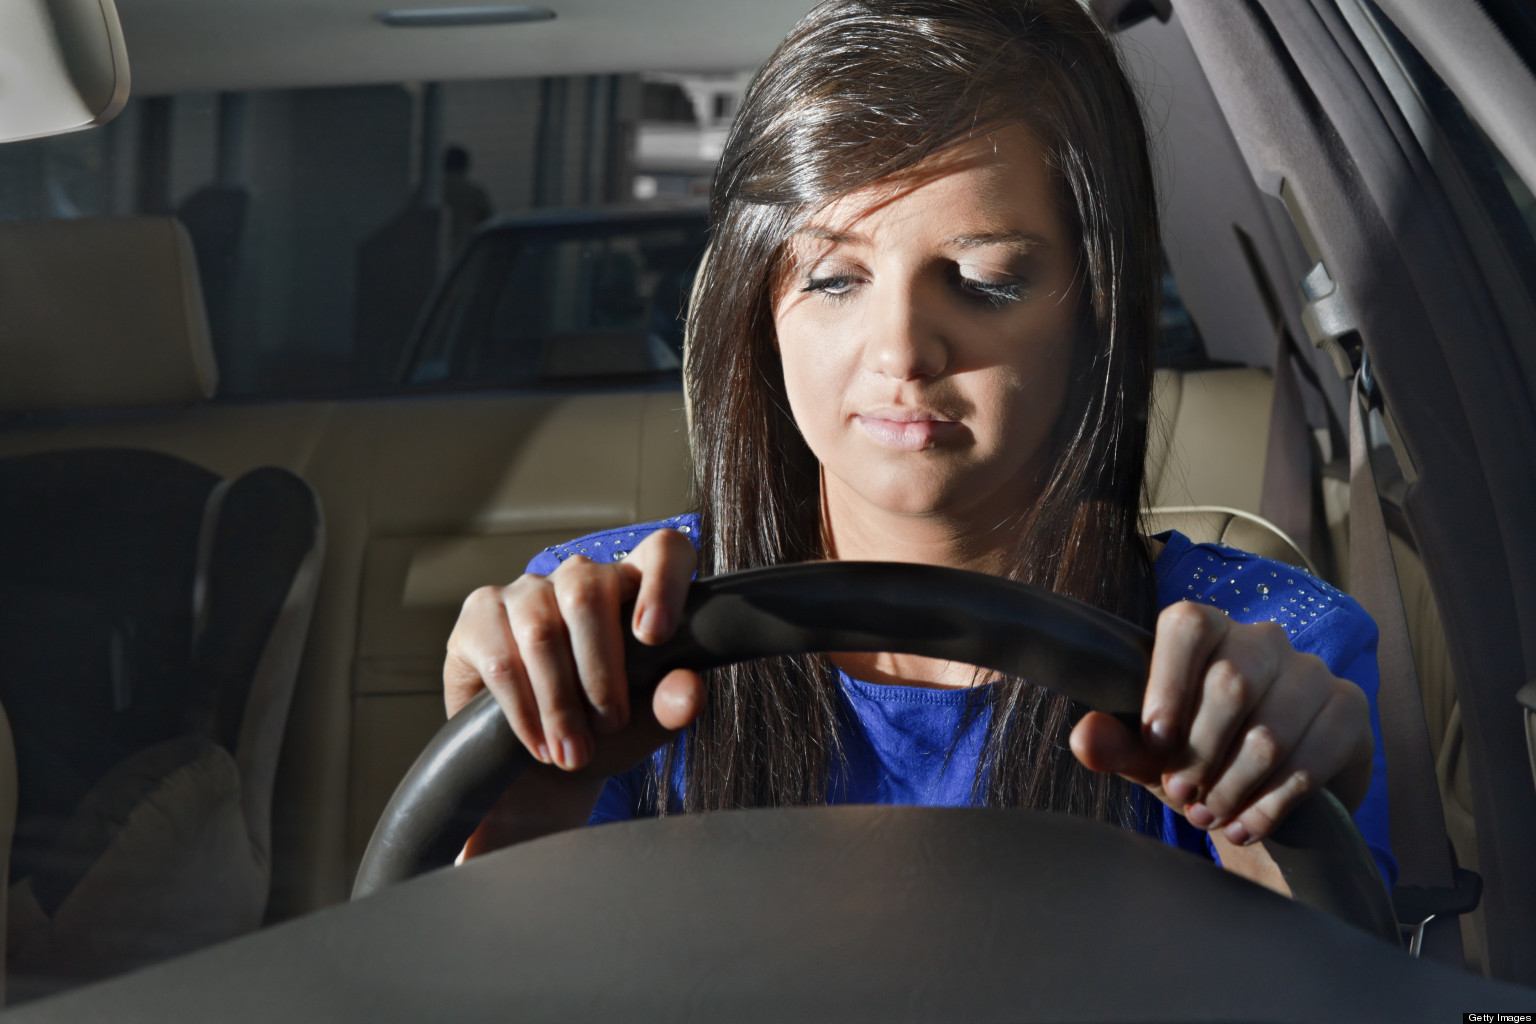 Teens Short On Sleep Have Higher Car Accident Risk Study Finds HuffPost